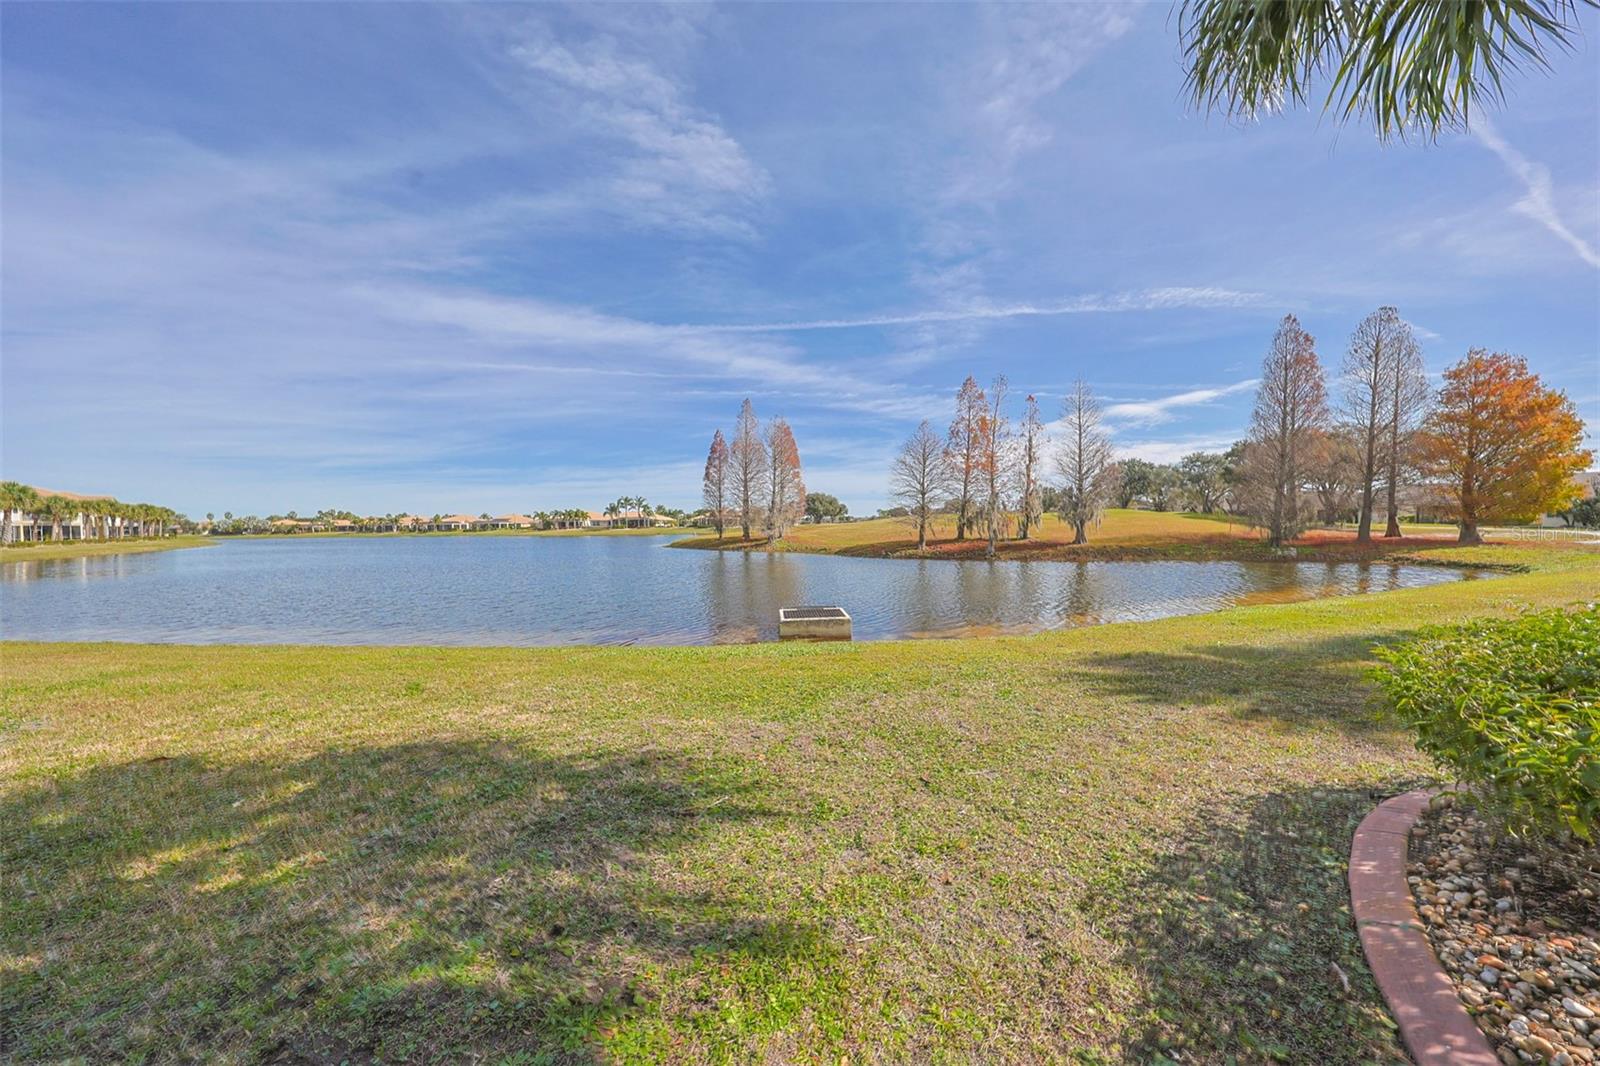 This condo unit backs up to a large, beautiful pond.